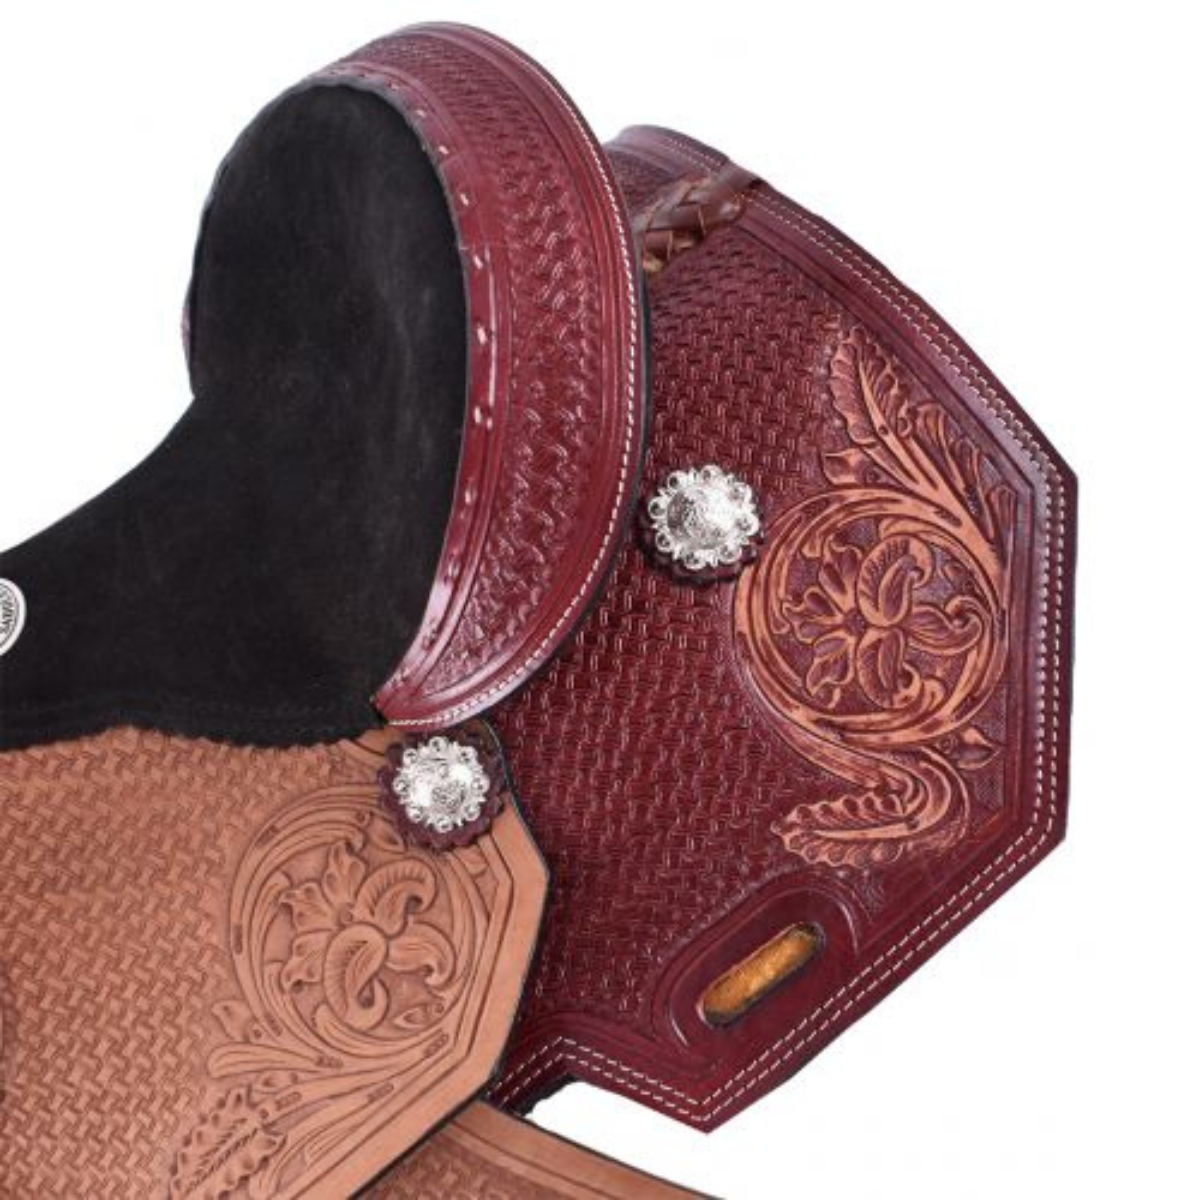 12" DOUBLE T YOUTH SADDLE WITH FLORAL TOOLING - Double T Saddles